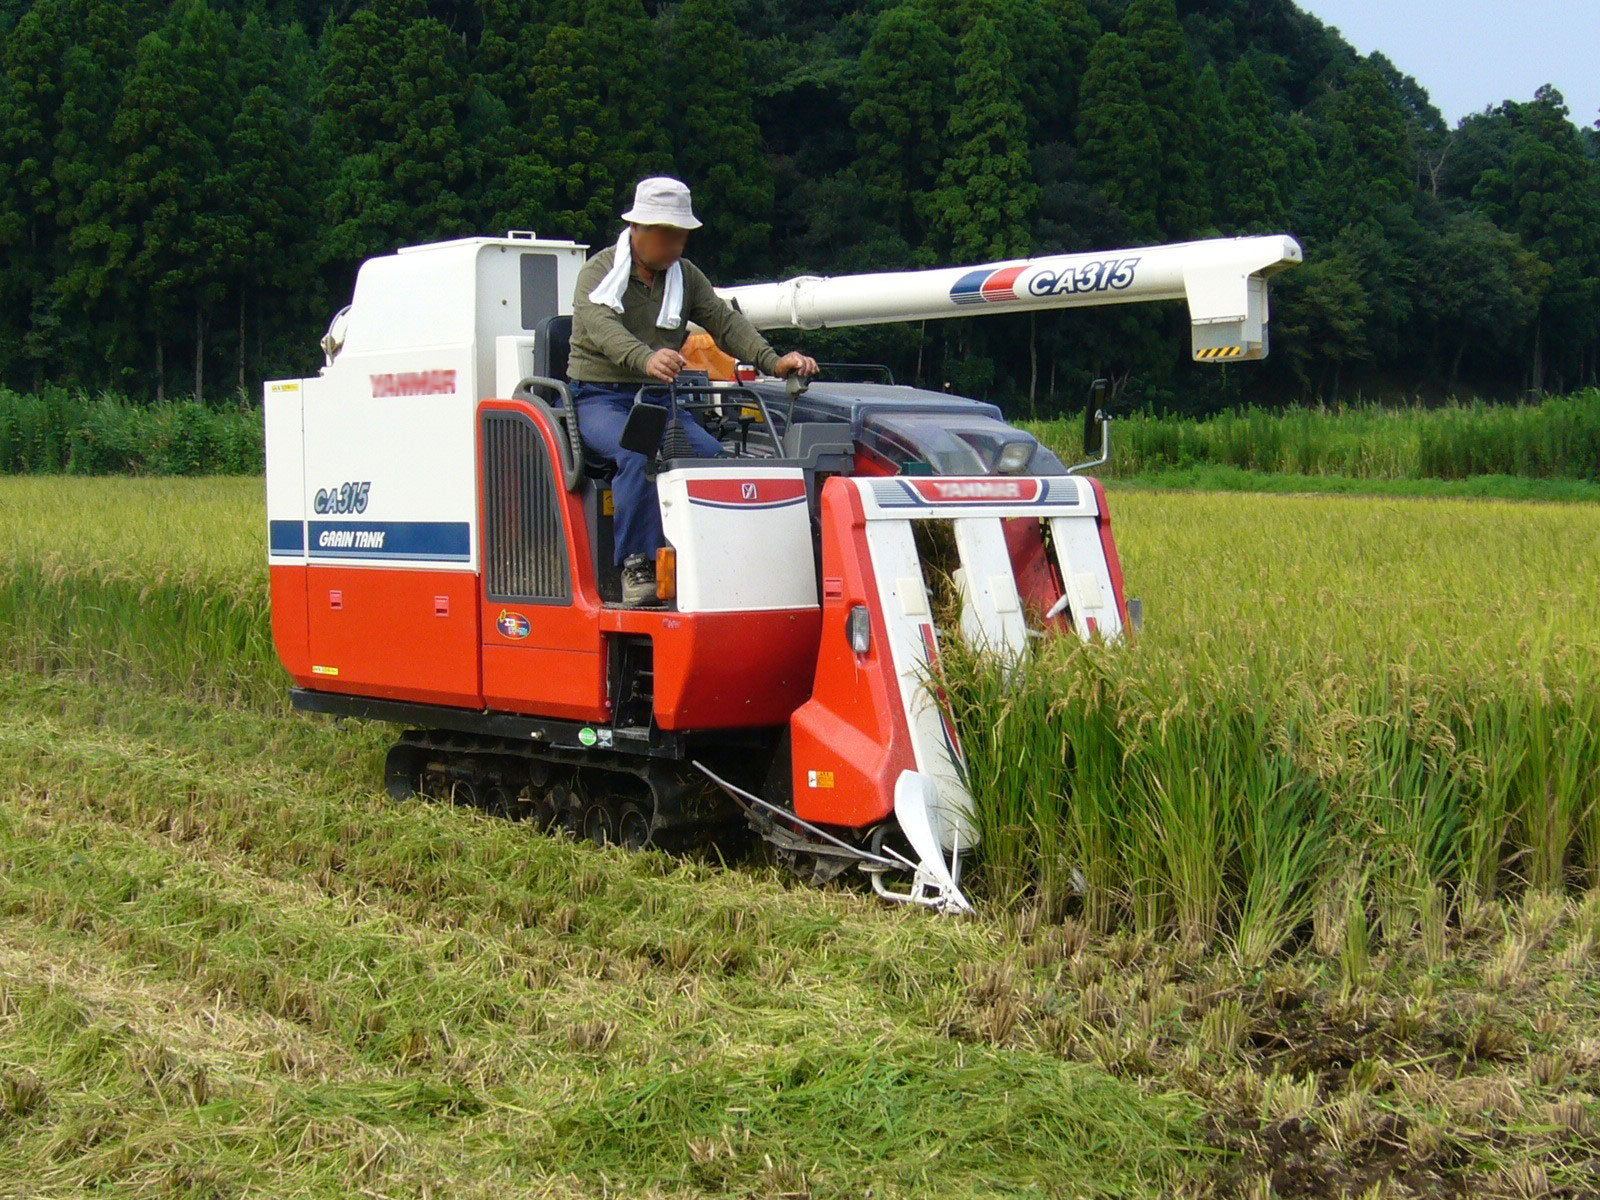 Mini harvesters are also used in high-income countries, as in this photo from Japan